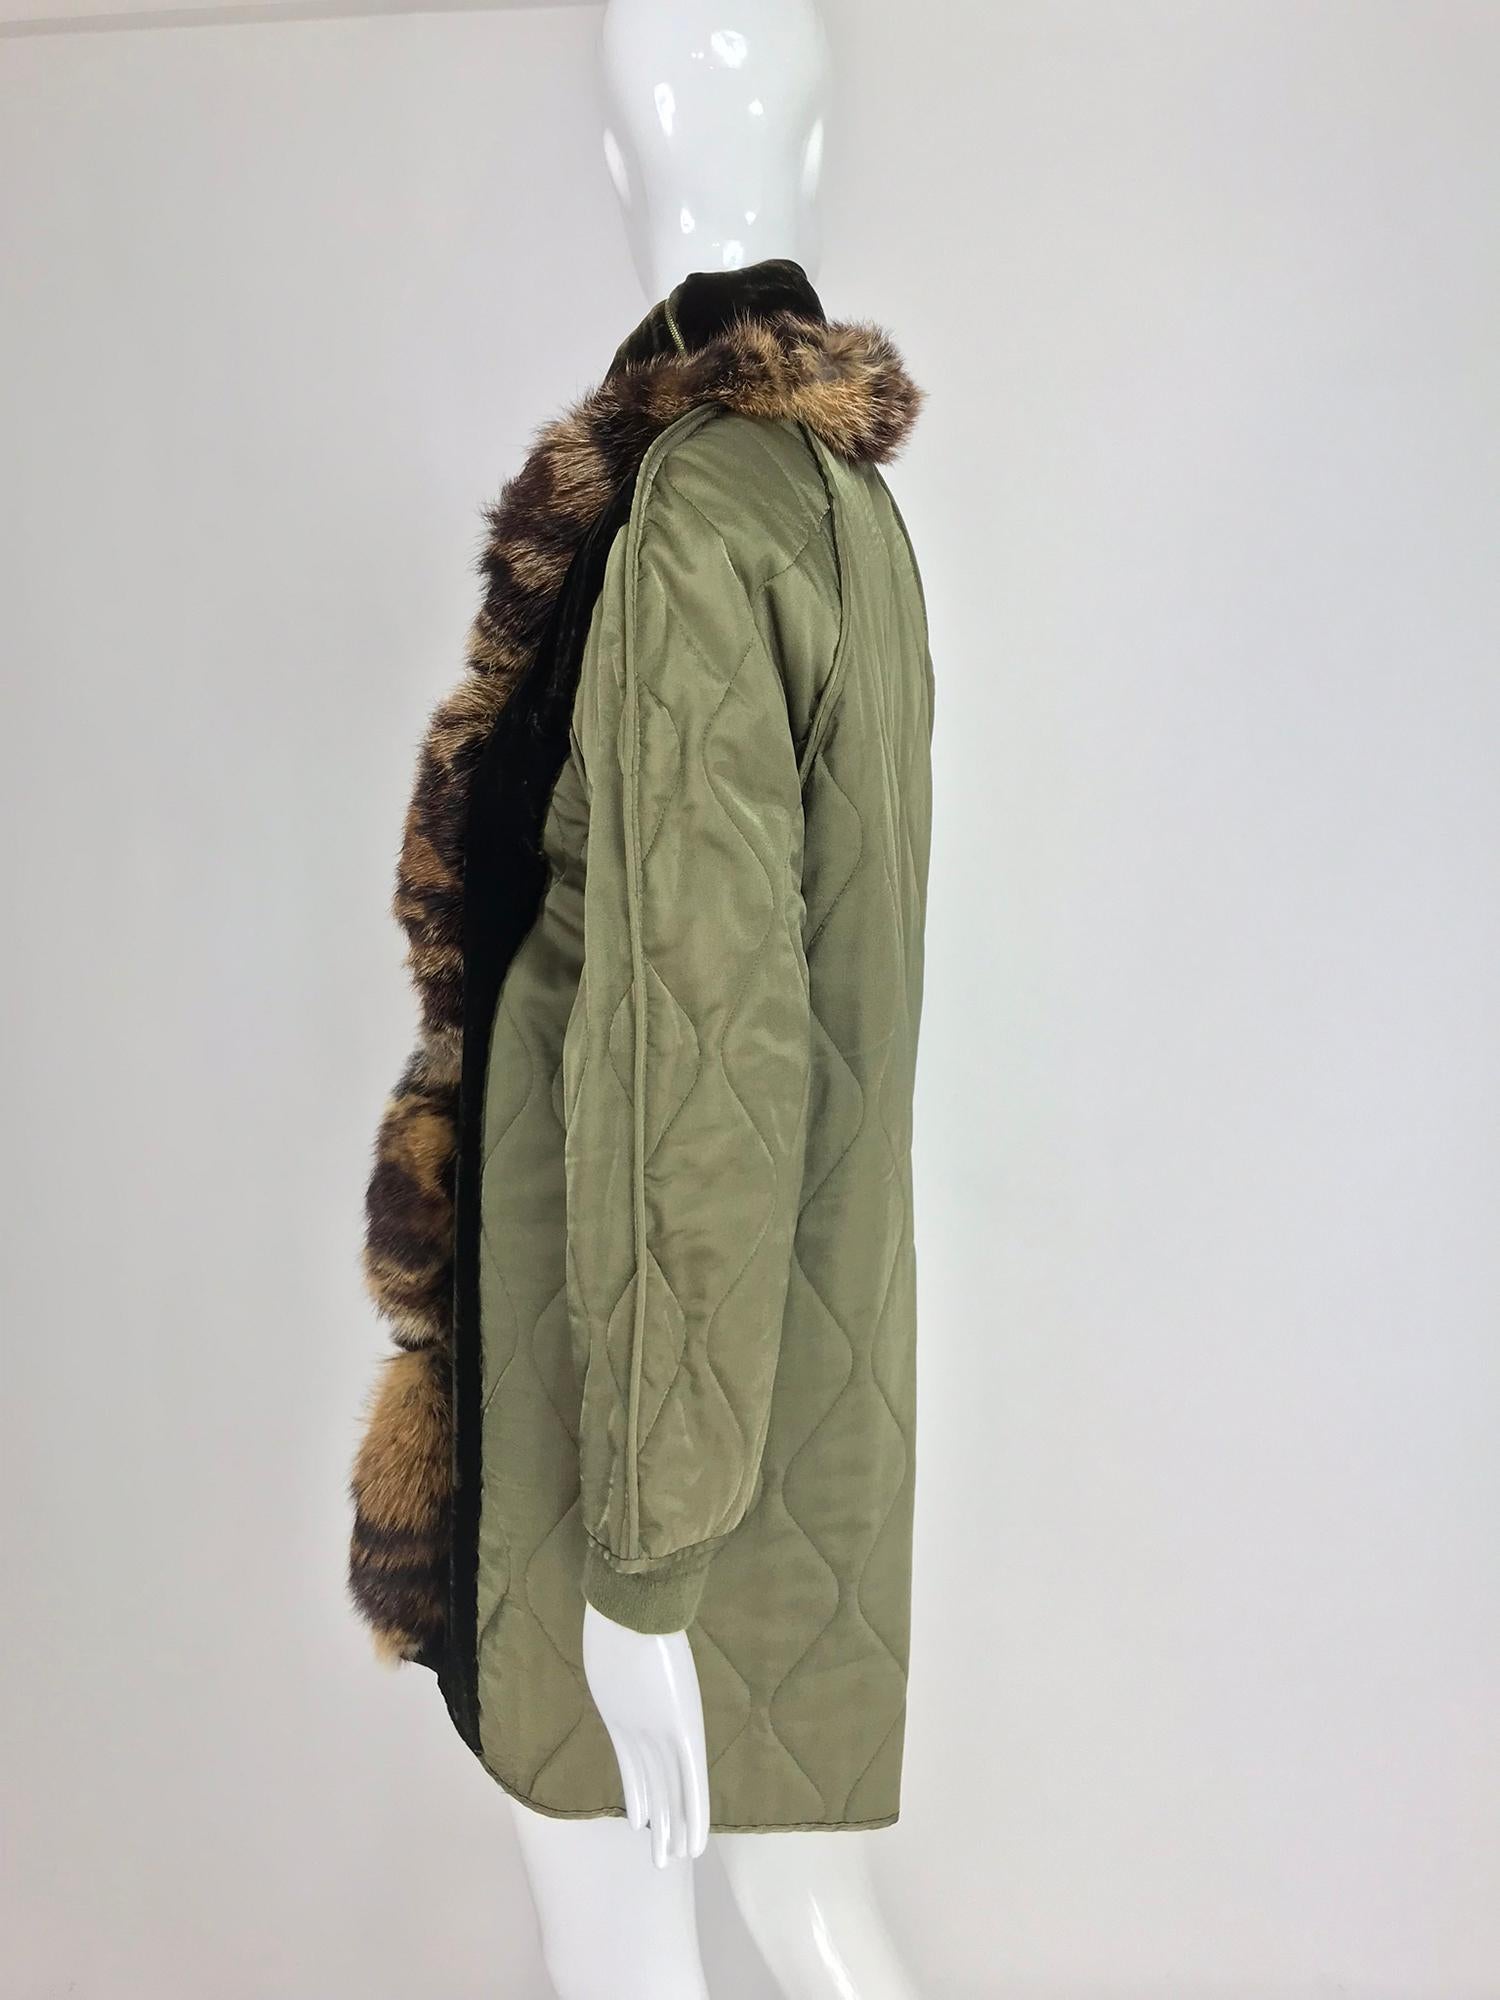 Gianfranco Ferre Olive Velvet and Fur Trimmed quilted jacket and sweater 1990s 3